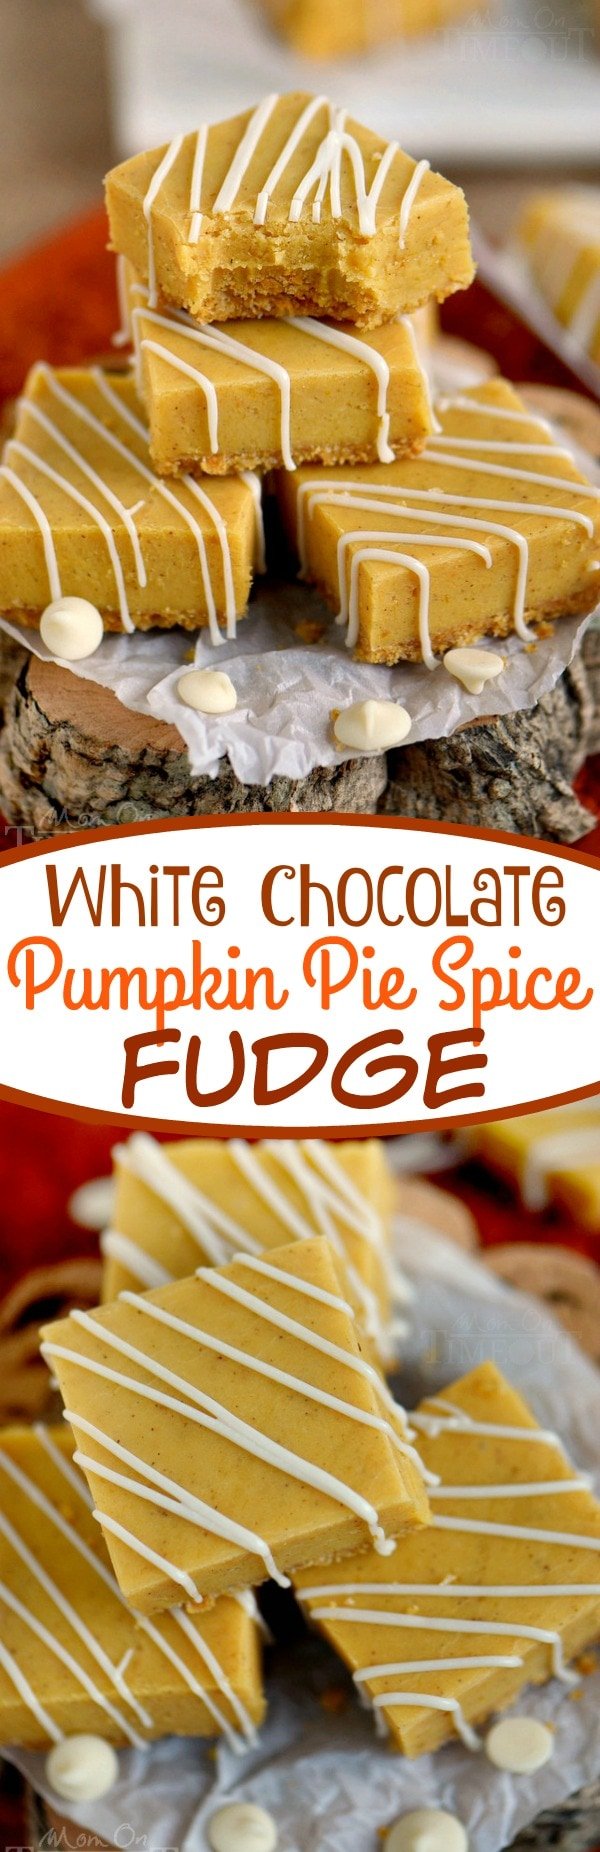 This delightful White Chocolate Pumpkin Pie Spice Fudge is made with real pumpkin, a graham cracker crust, and is topped with a white chocolate drizzle - perfection! Be sure to make a batch for friends and family this year!